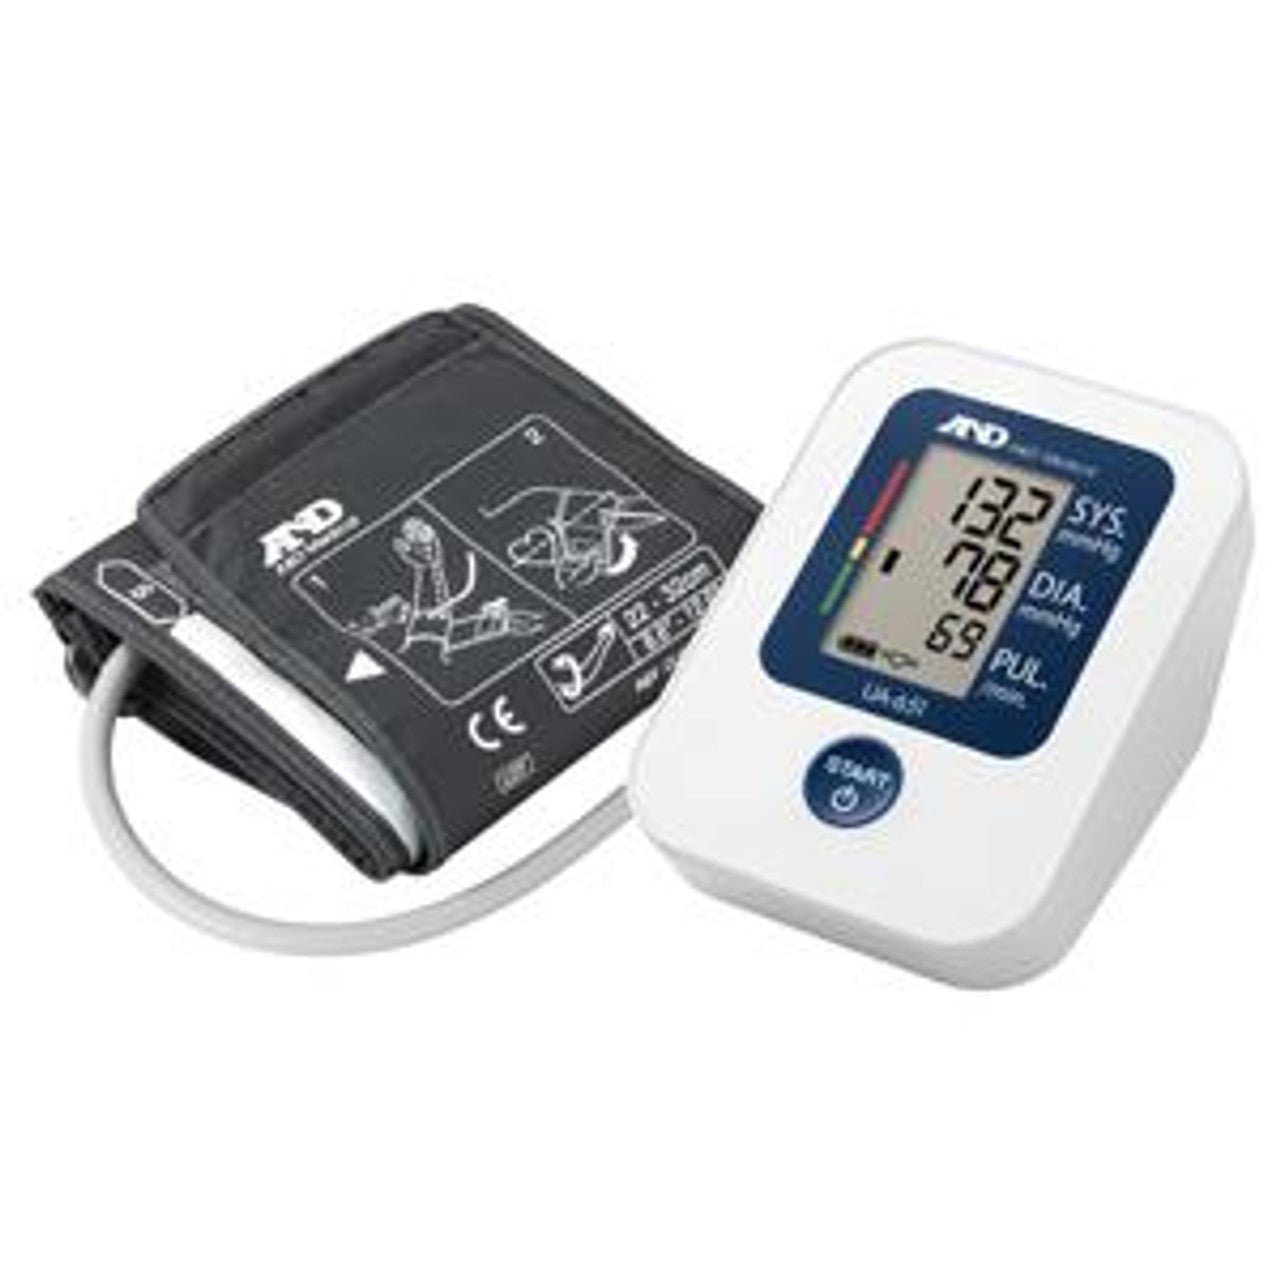 A&D Medical Essential One Button Blood Pressure Monitor - A&D UA651, Complete w/ Batteries - Midwest DME Supply